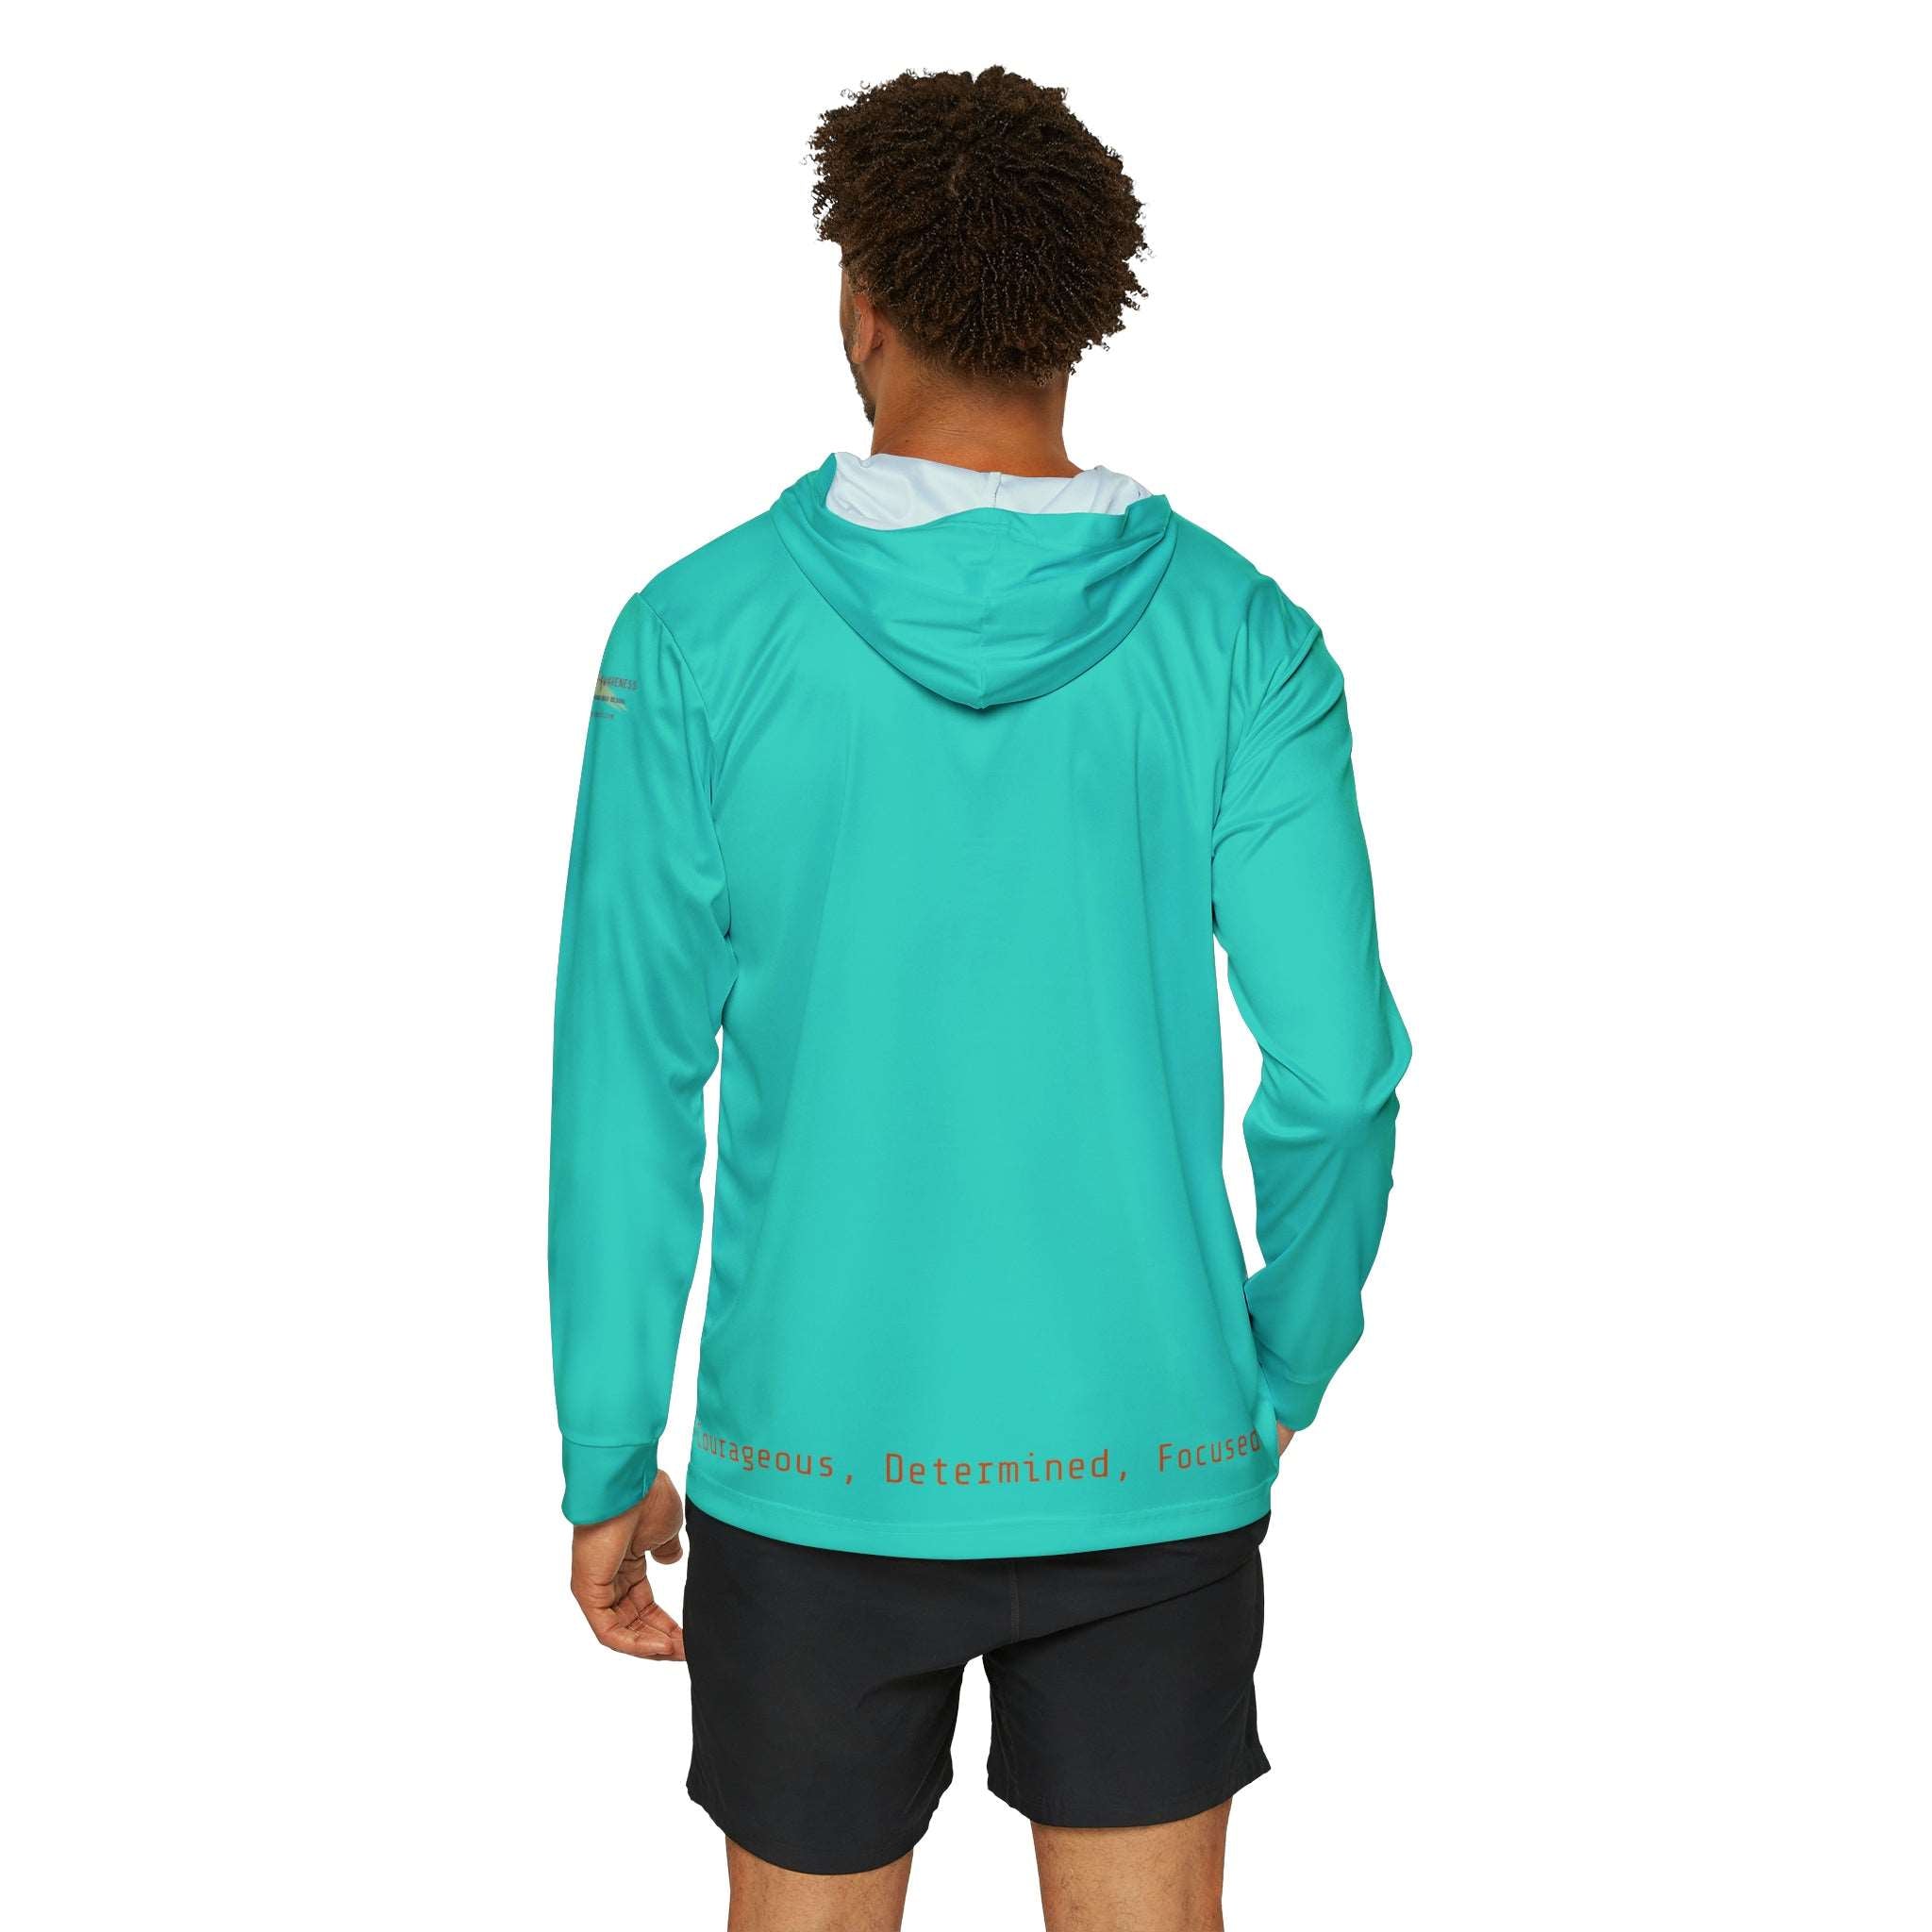 Capable Men's Warmup Hoodie: Elevate Performance Activewear Durable Fabric Made in USA Men's Hoodie Mental Health Support Moisture-wicking Performance Apparel Quality Control Sports Warmup UPF 50+ All Over Prints 11423851352708760886_2048_148013a9-be00-497c-8078-17543781302e Printify